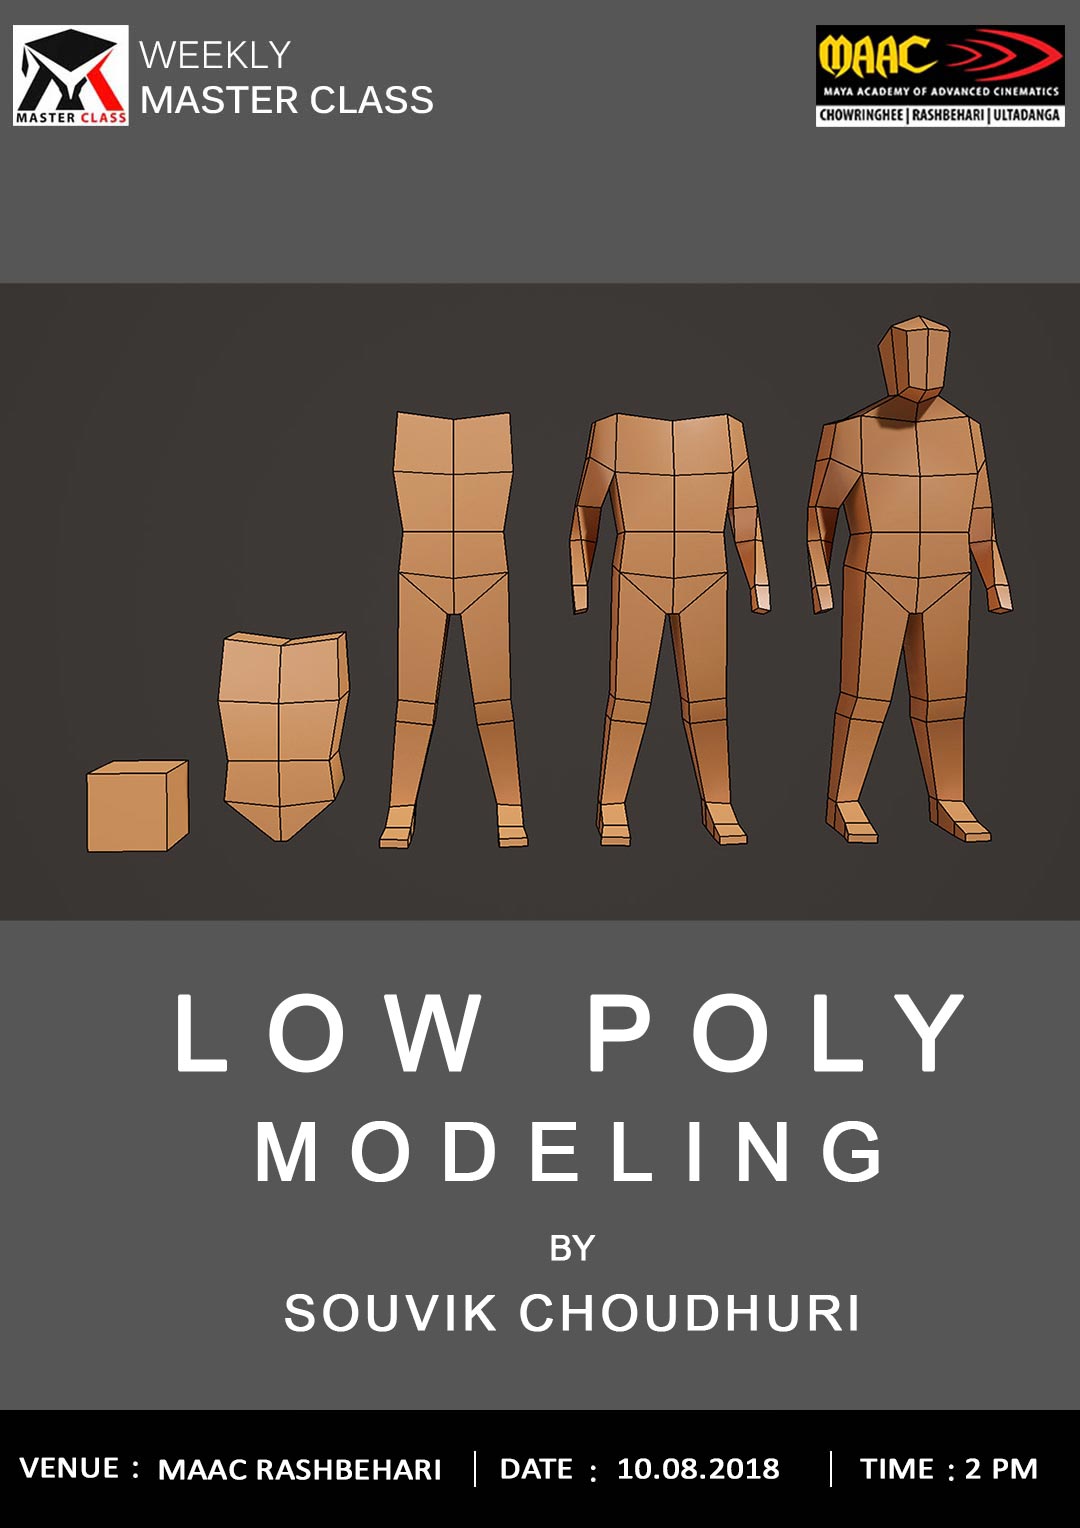 Weekly Master Class on Low Poly Modeling